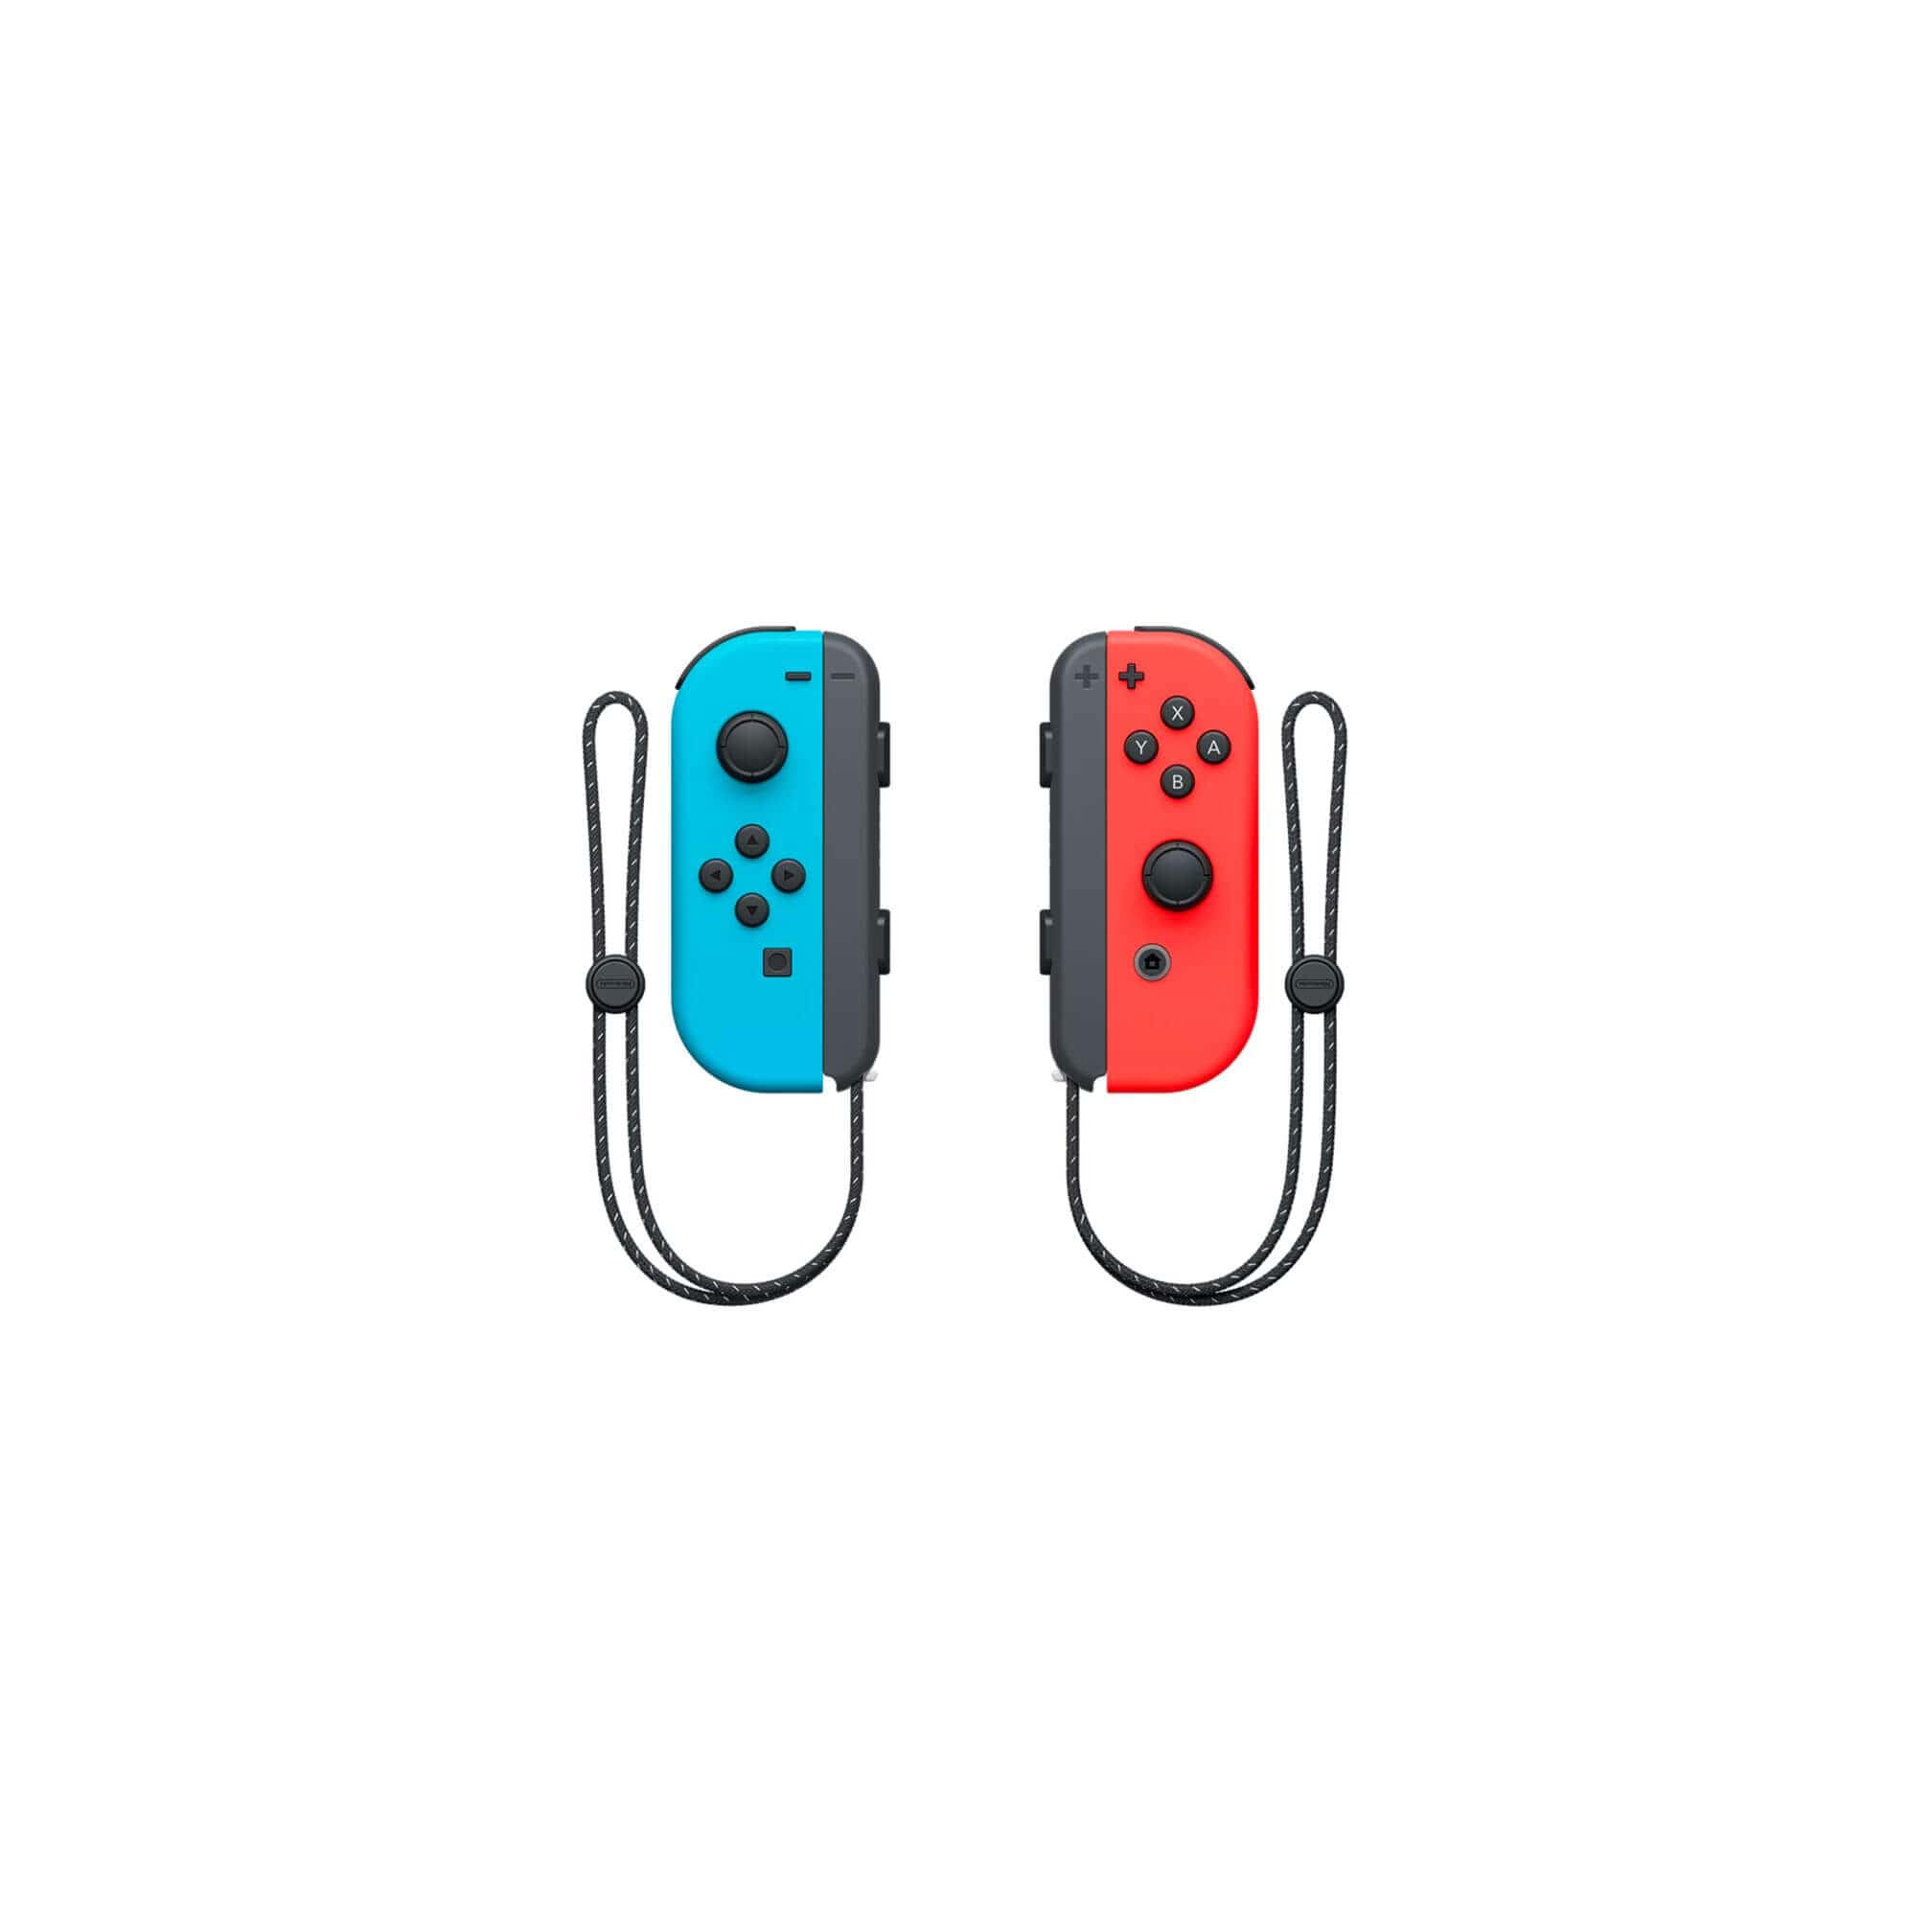 Nintendo Switch Console with Neon Blue and Neon Red Joy-Con